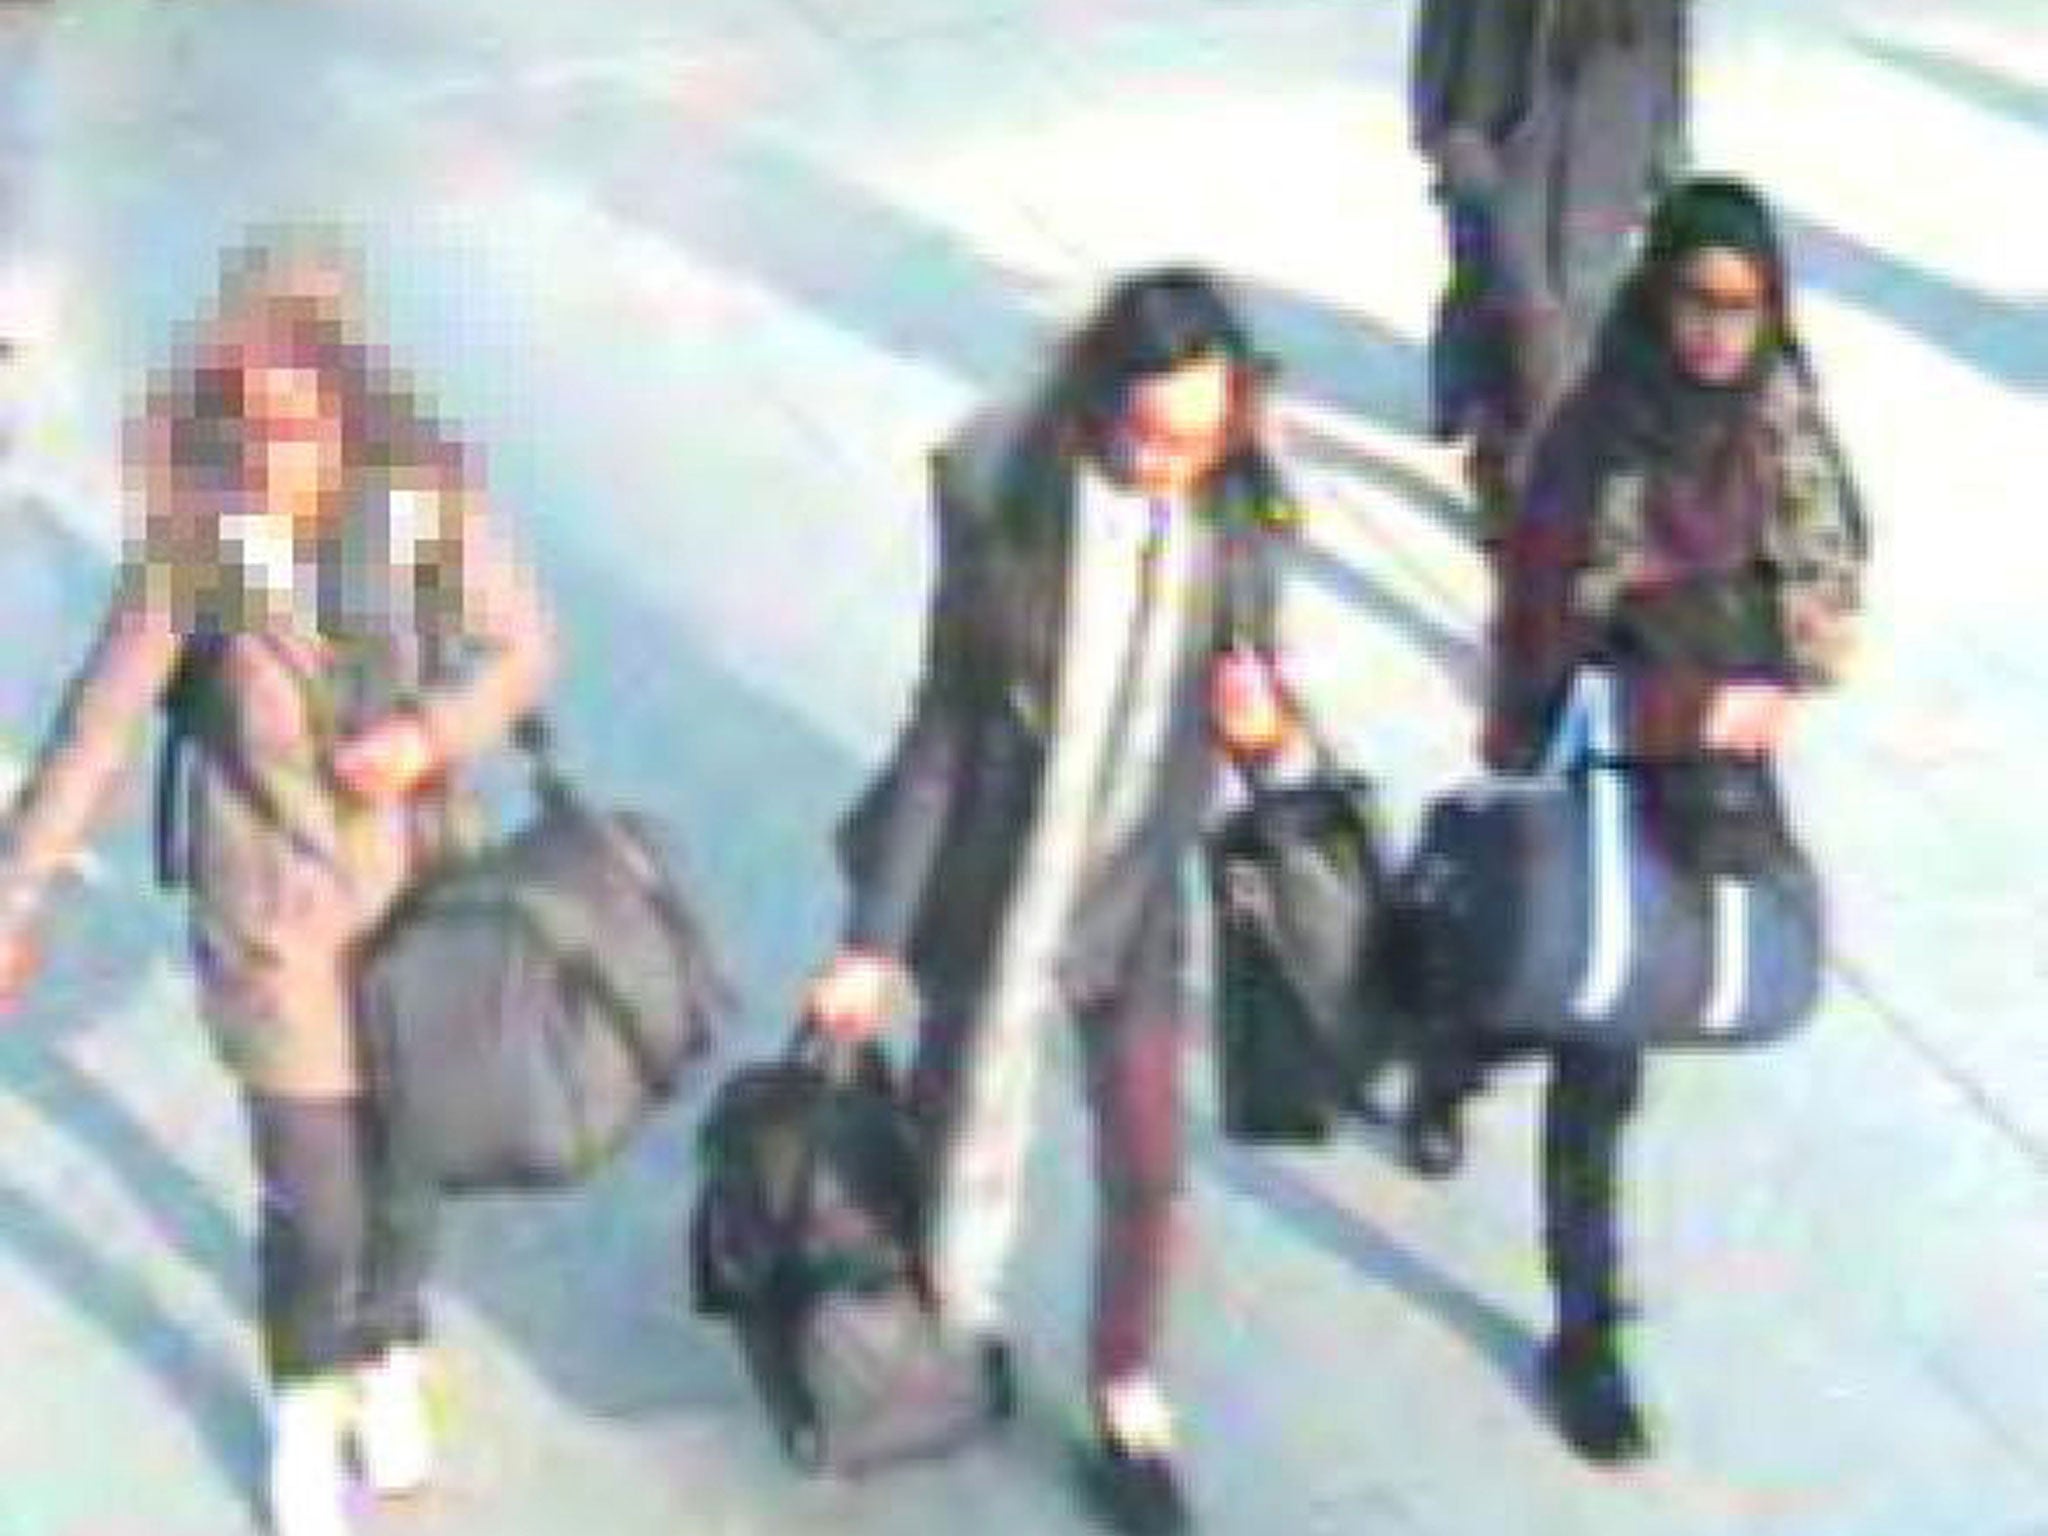 CCTV shows the three girls at Gatwick airport